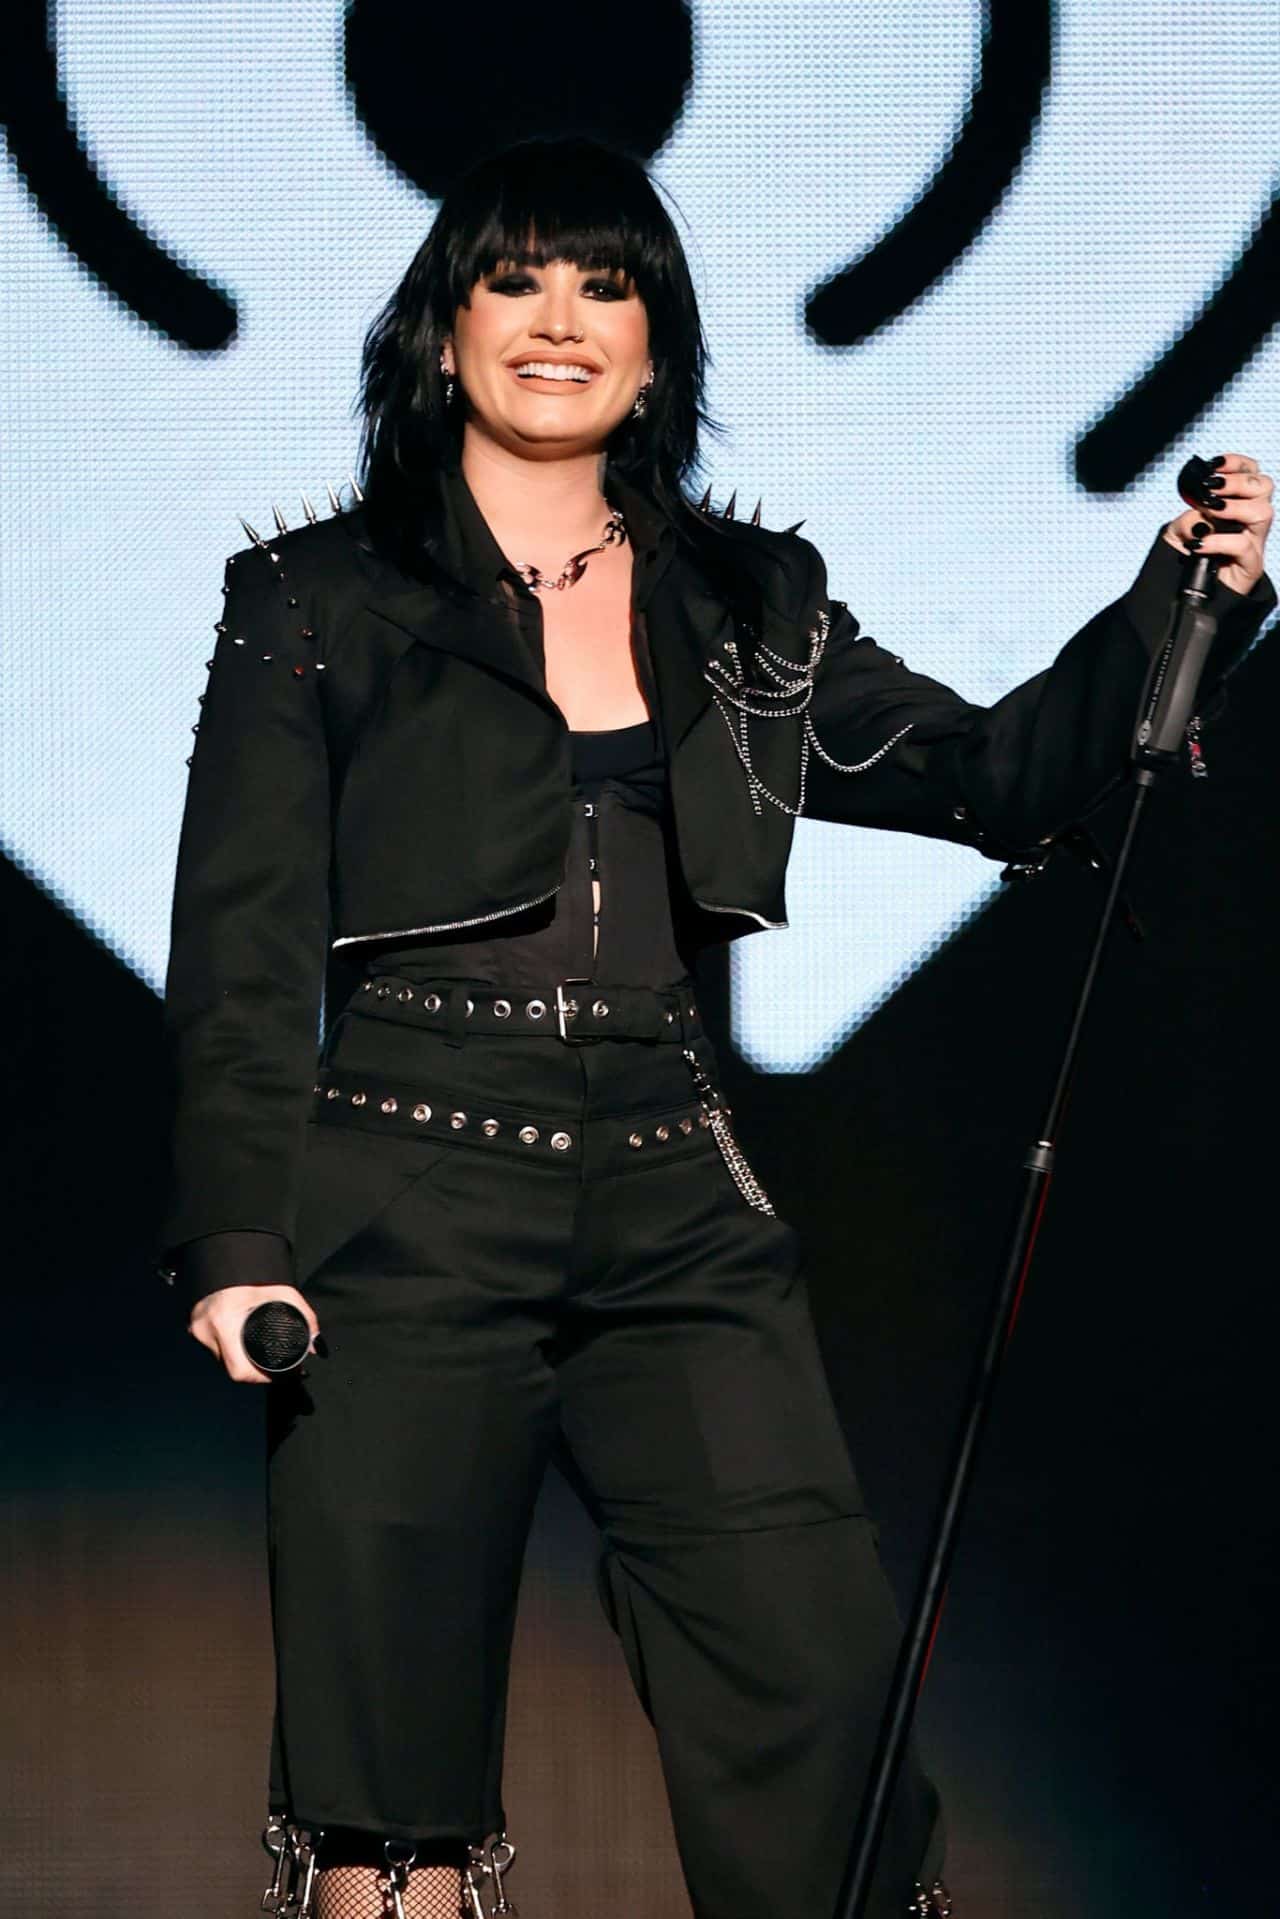 Demi Lovato Performs at Z100's iHeartRadio 2022 Jingle Ball in NYC